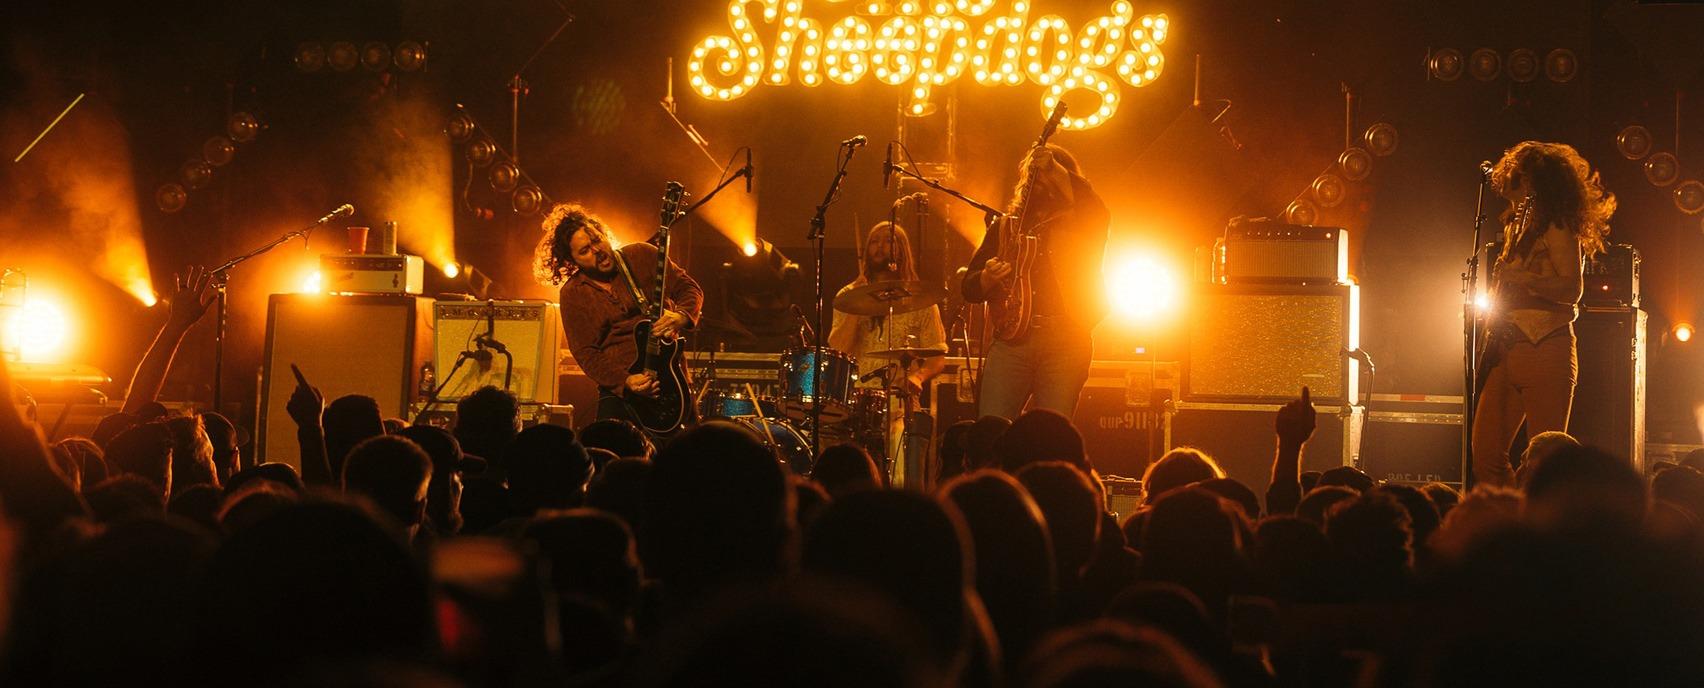 The rock band The Sheepdogs performing live on stage to a sold out crowd at the London Music Hall located in London, Ontario